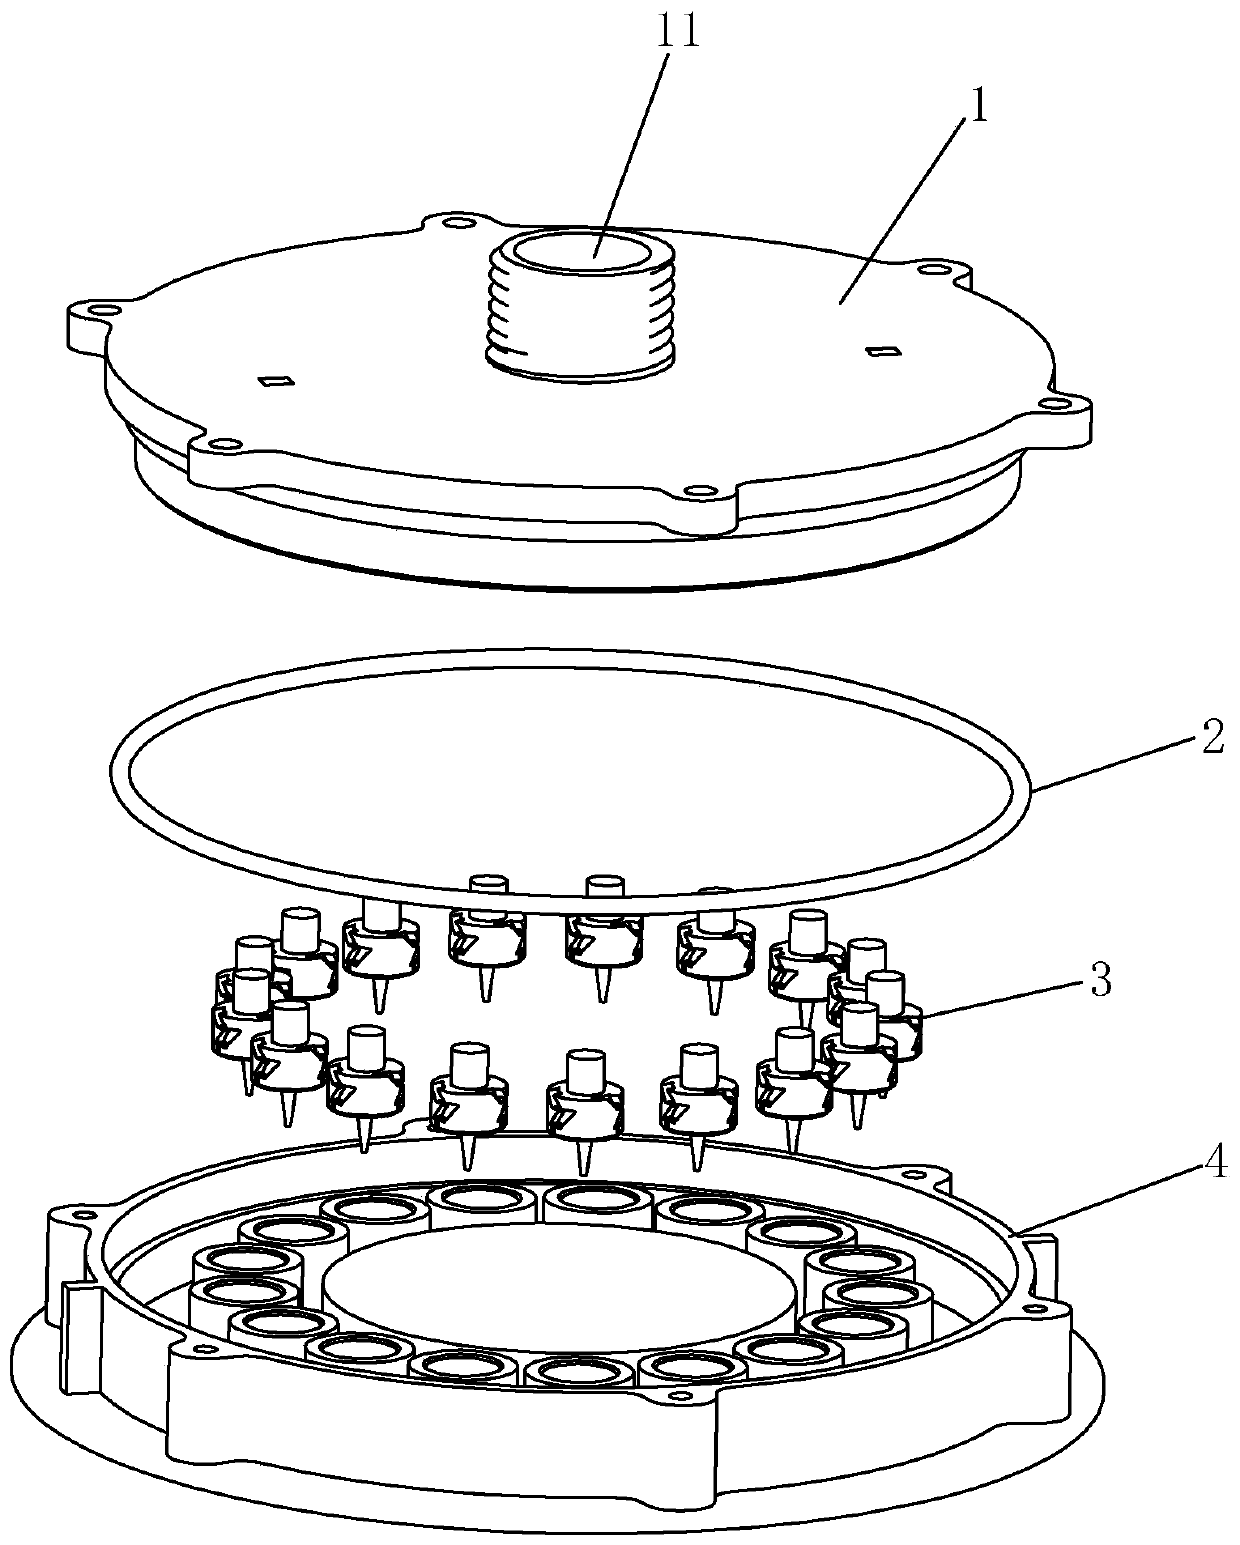 Spray cores and particle spray water device